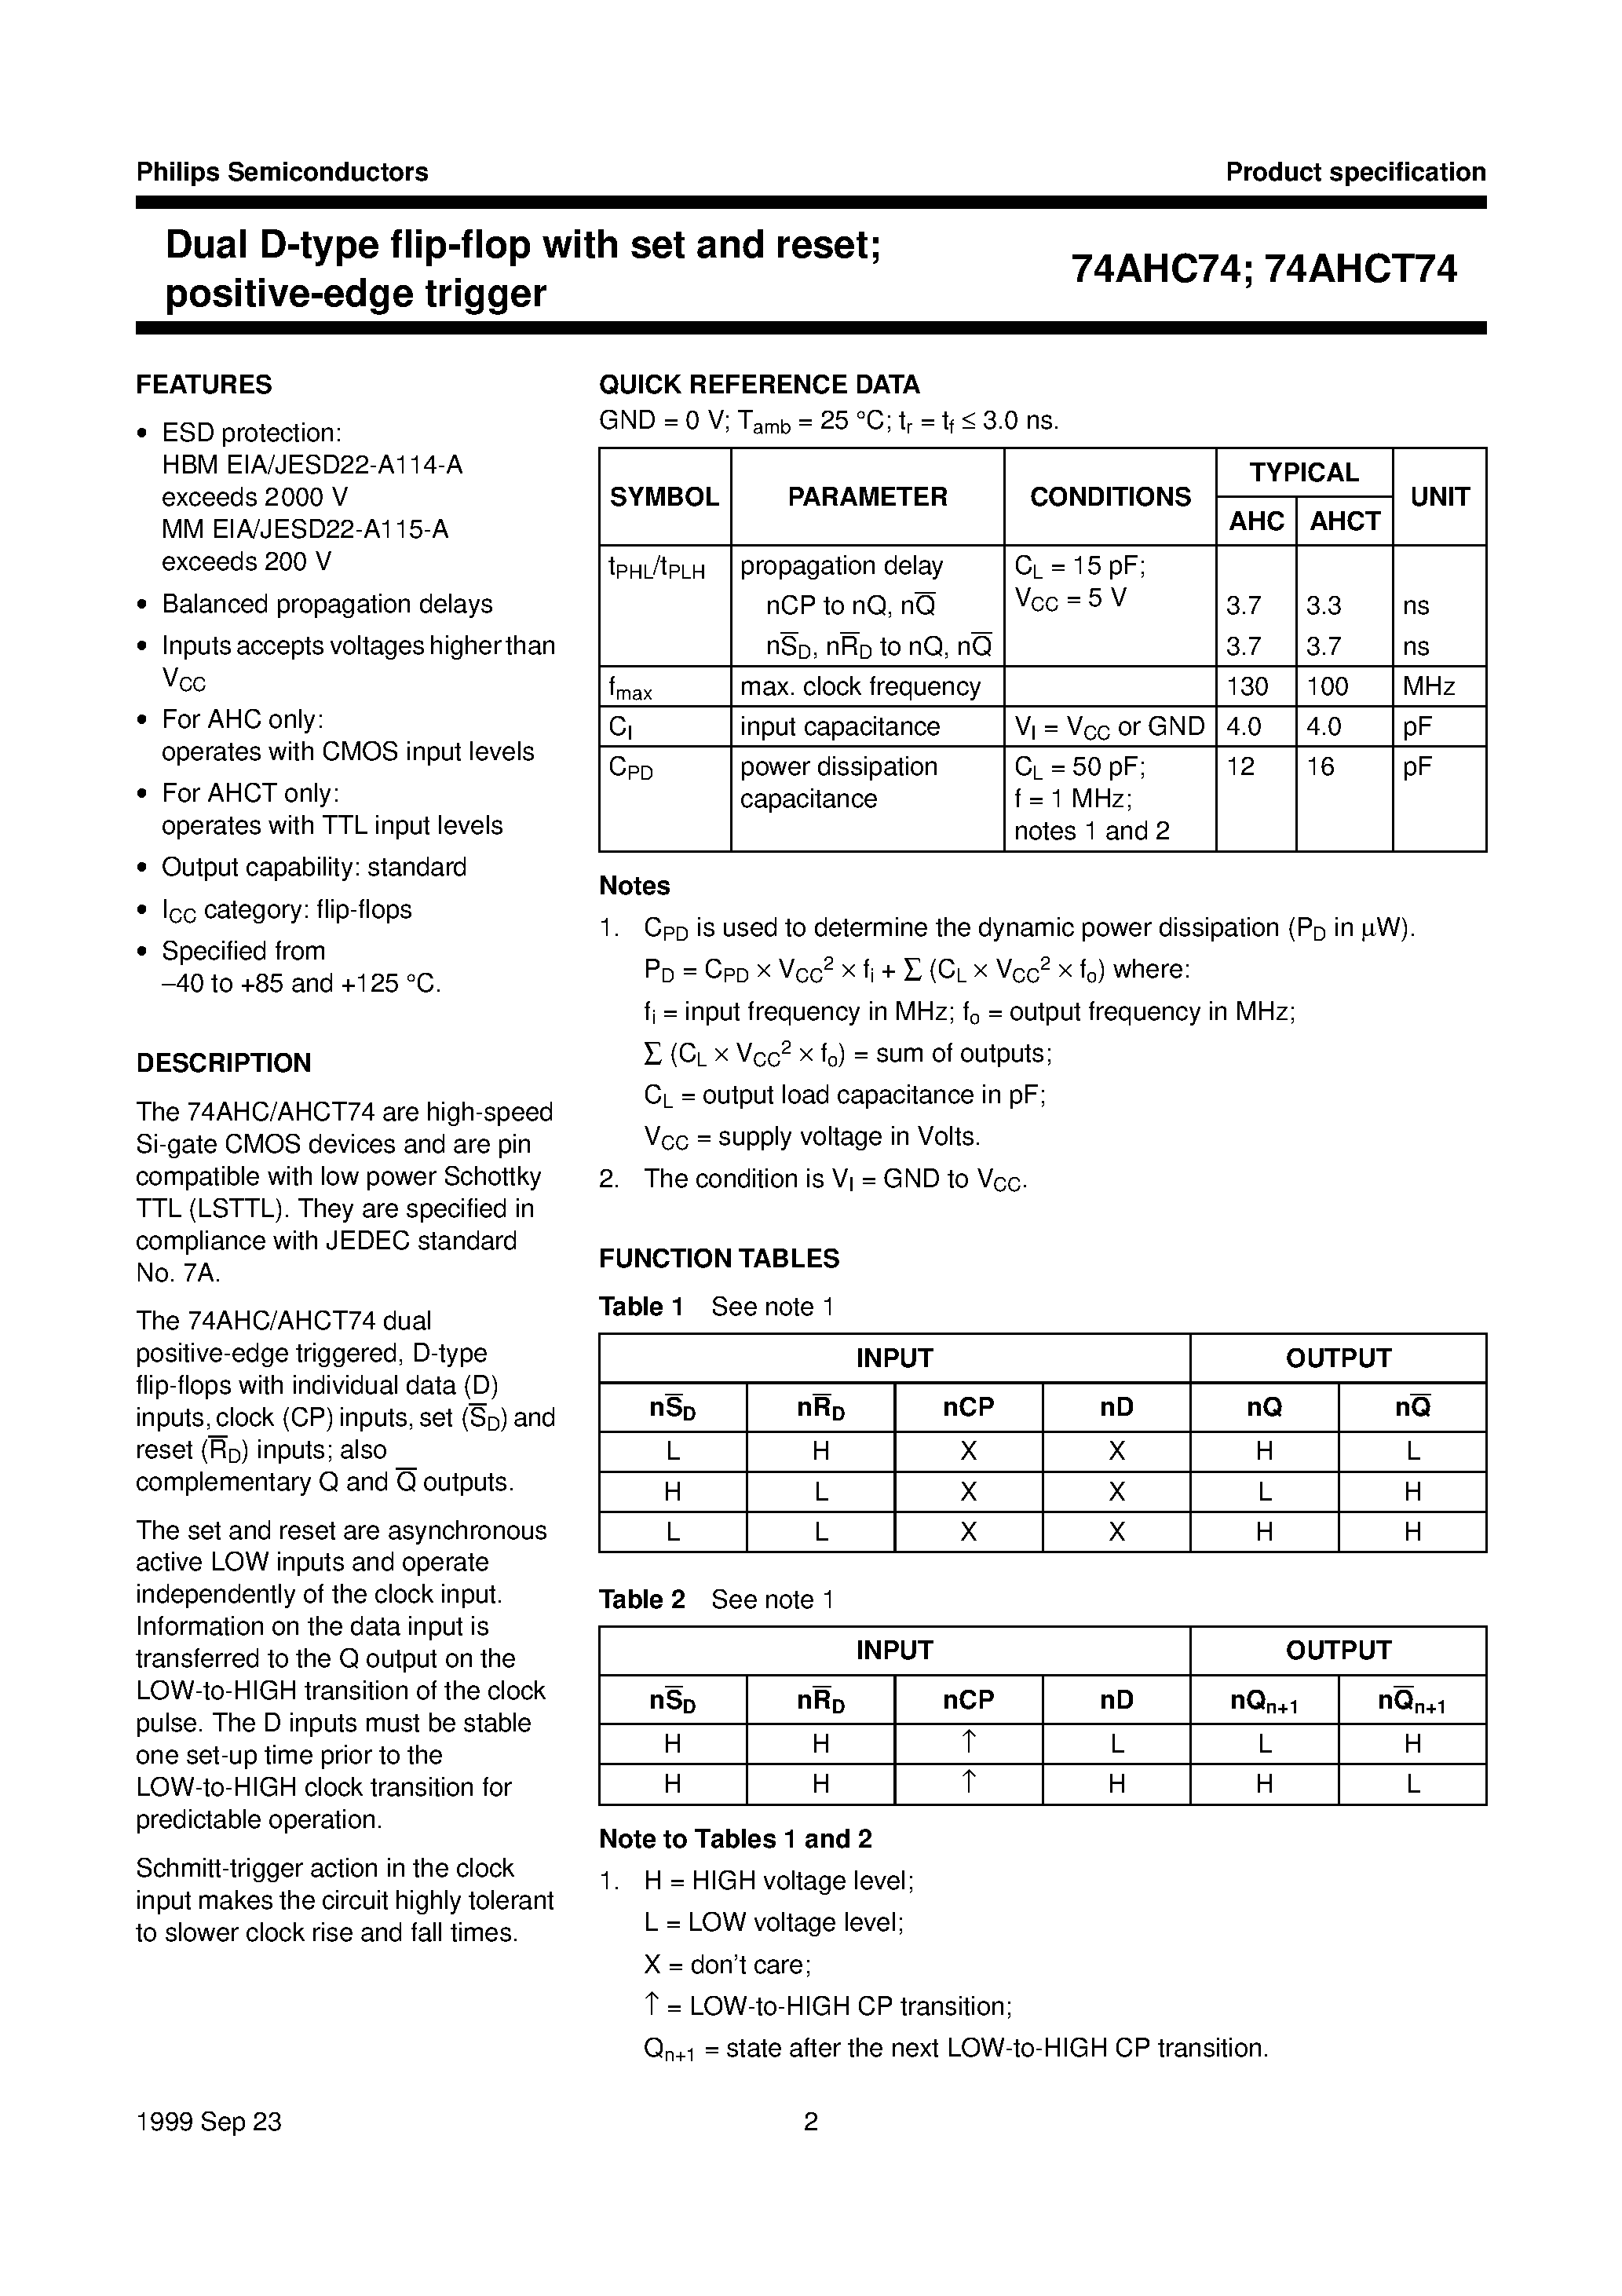 Datasheet 74AHCT74 - Dual D-type flip-flop with set and reset; positive-edge trigger page 2